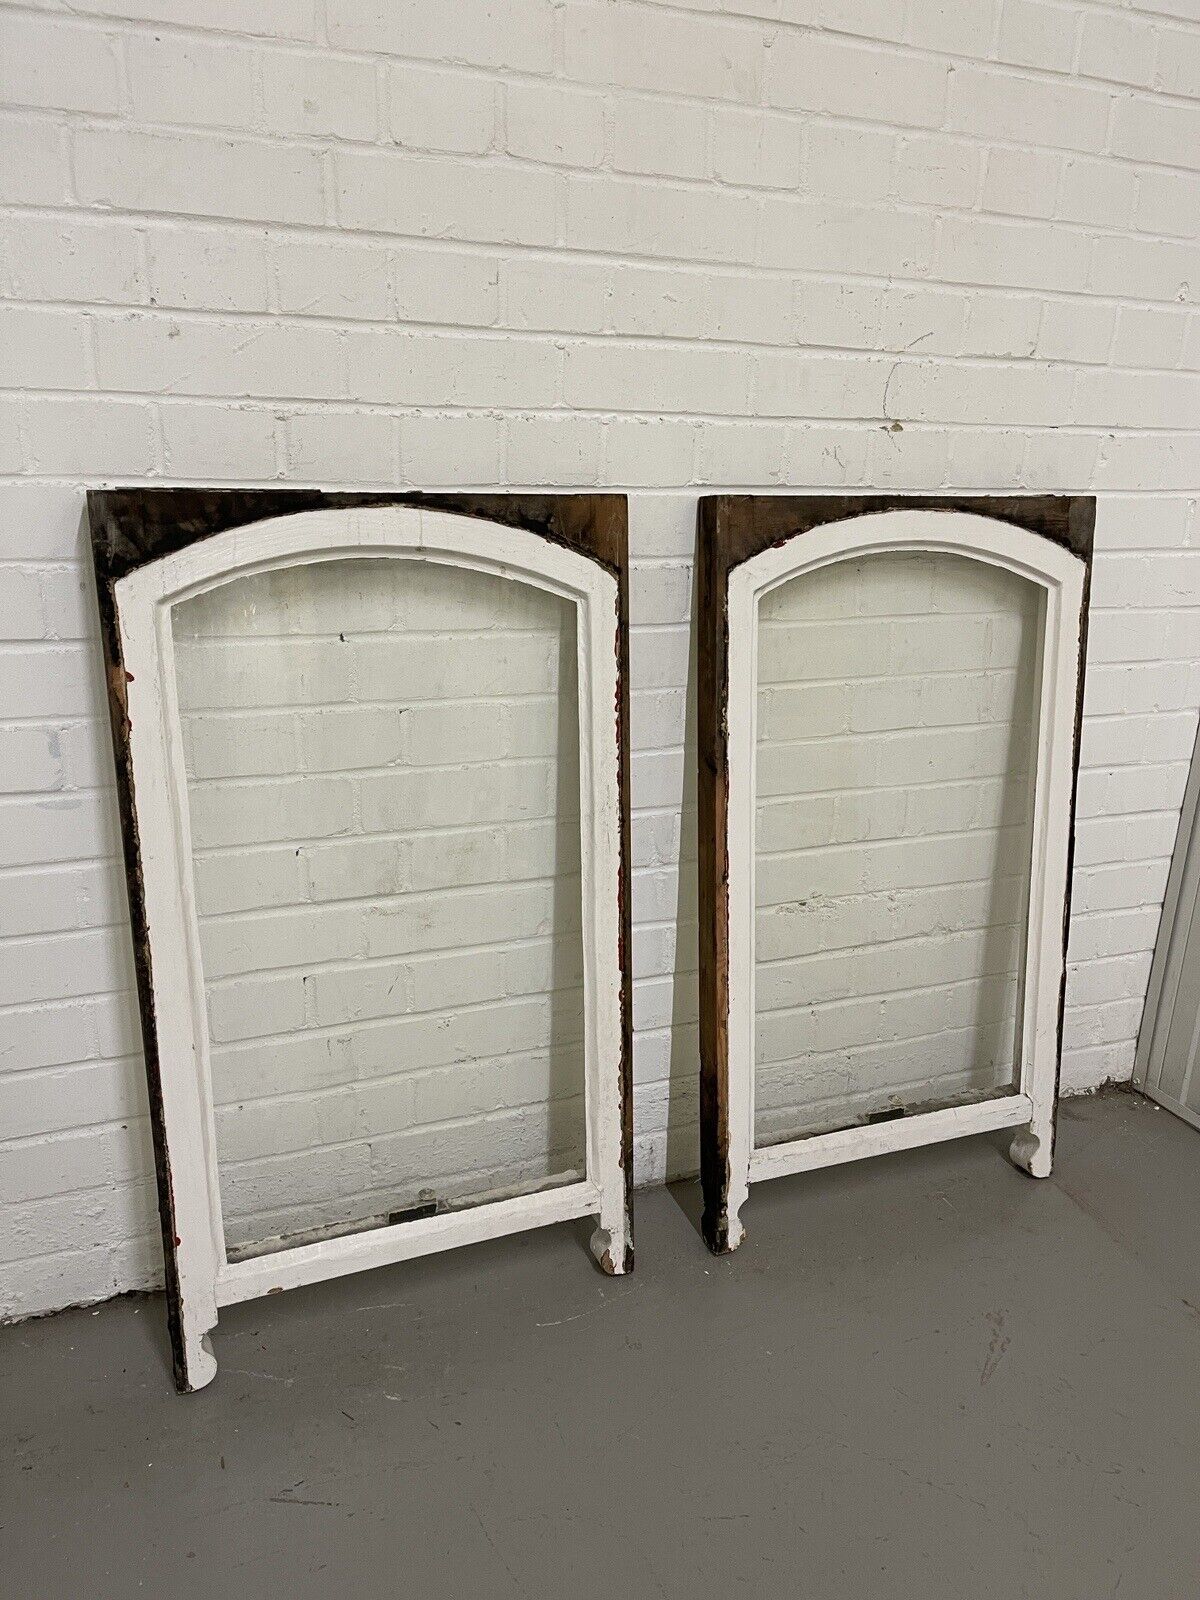 Pair Of Reclaimed Edwardian Arch Panel Wooden Sash Windows 535 x 930 535 x 930mm